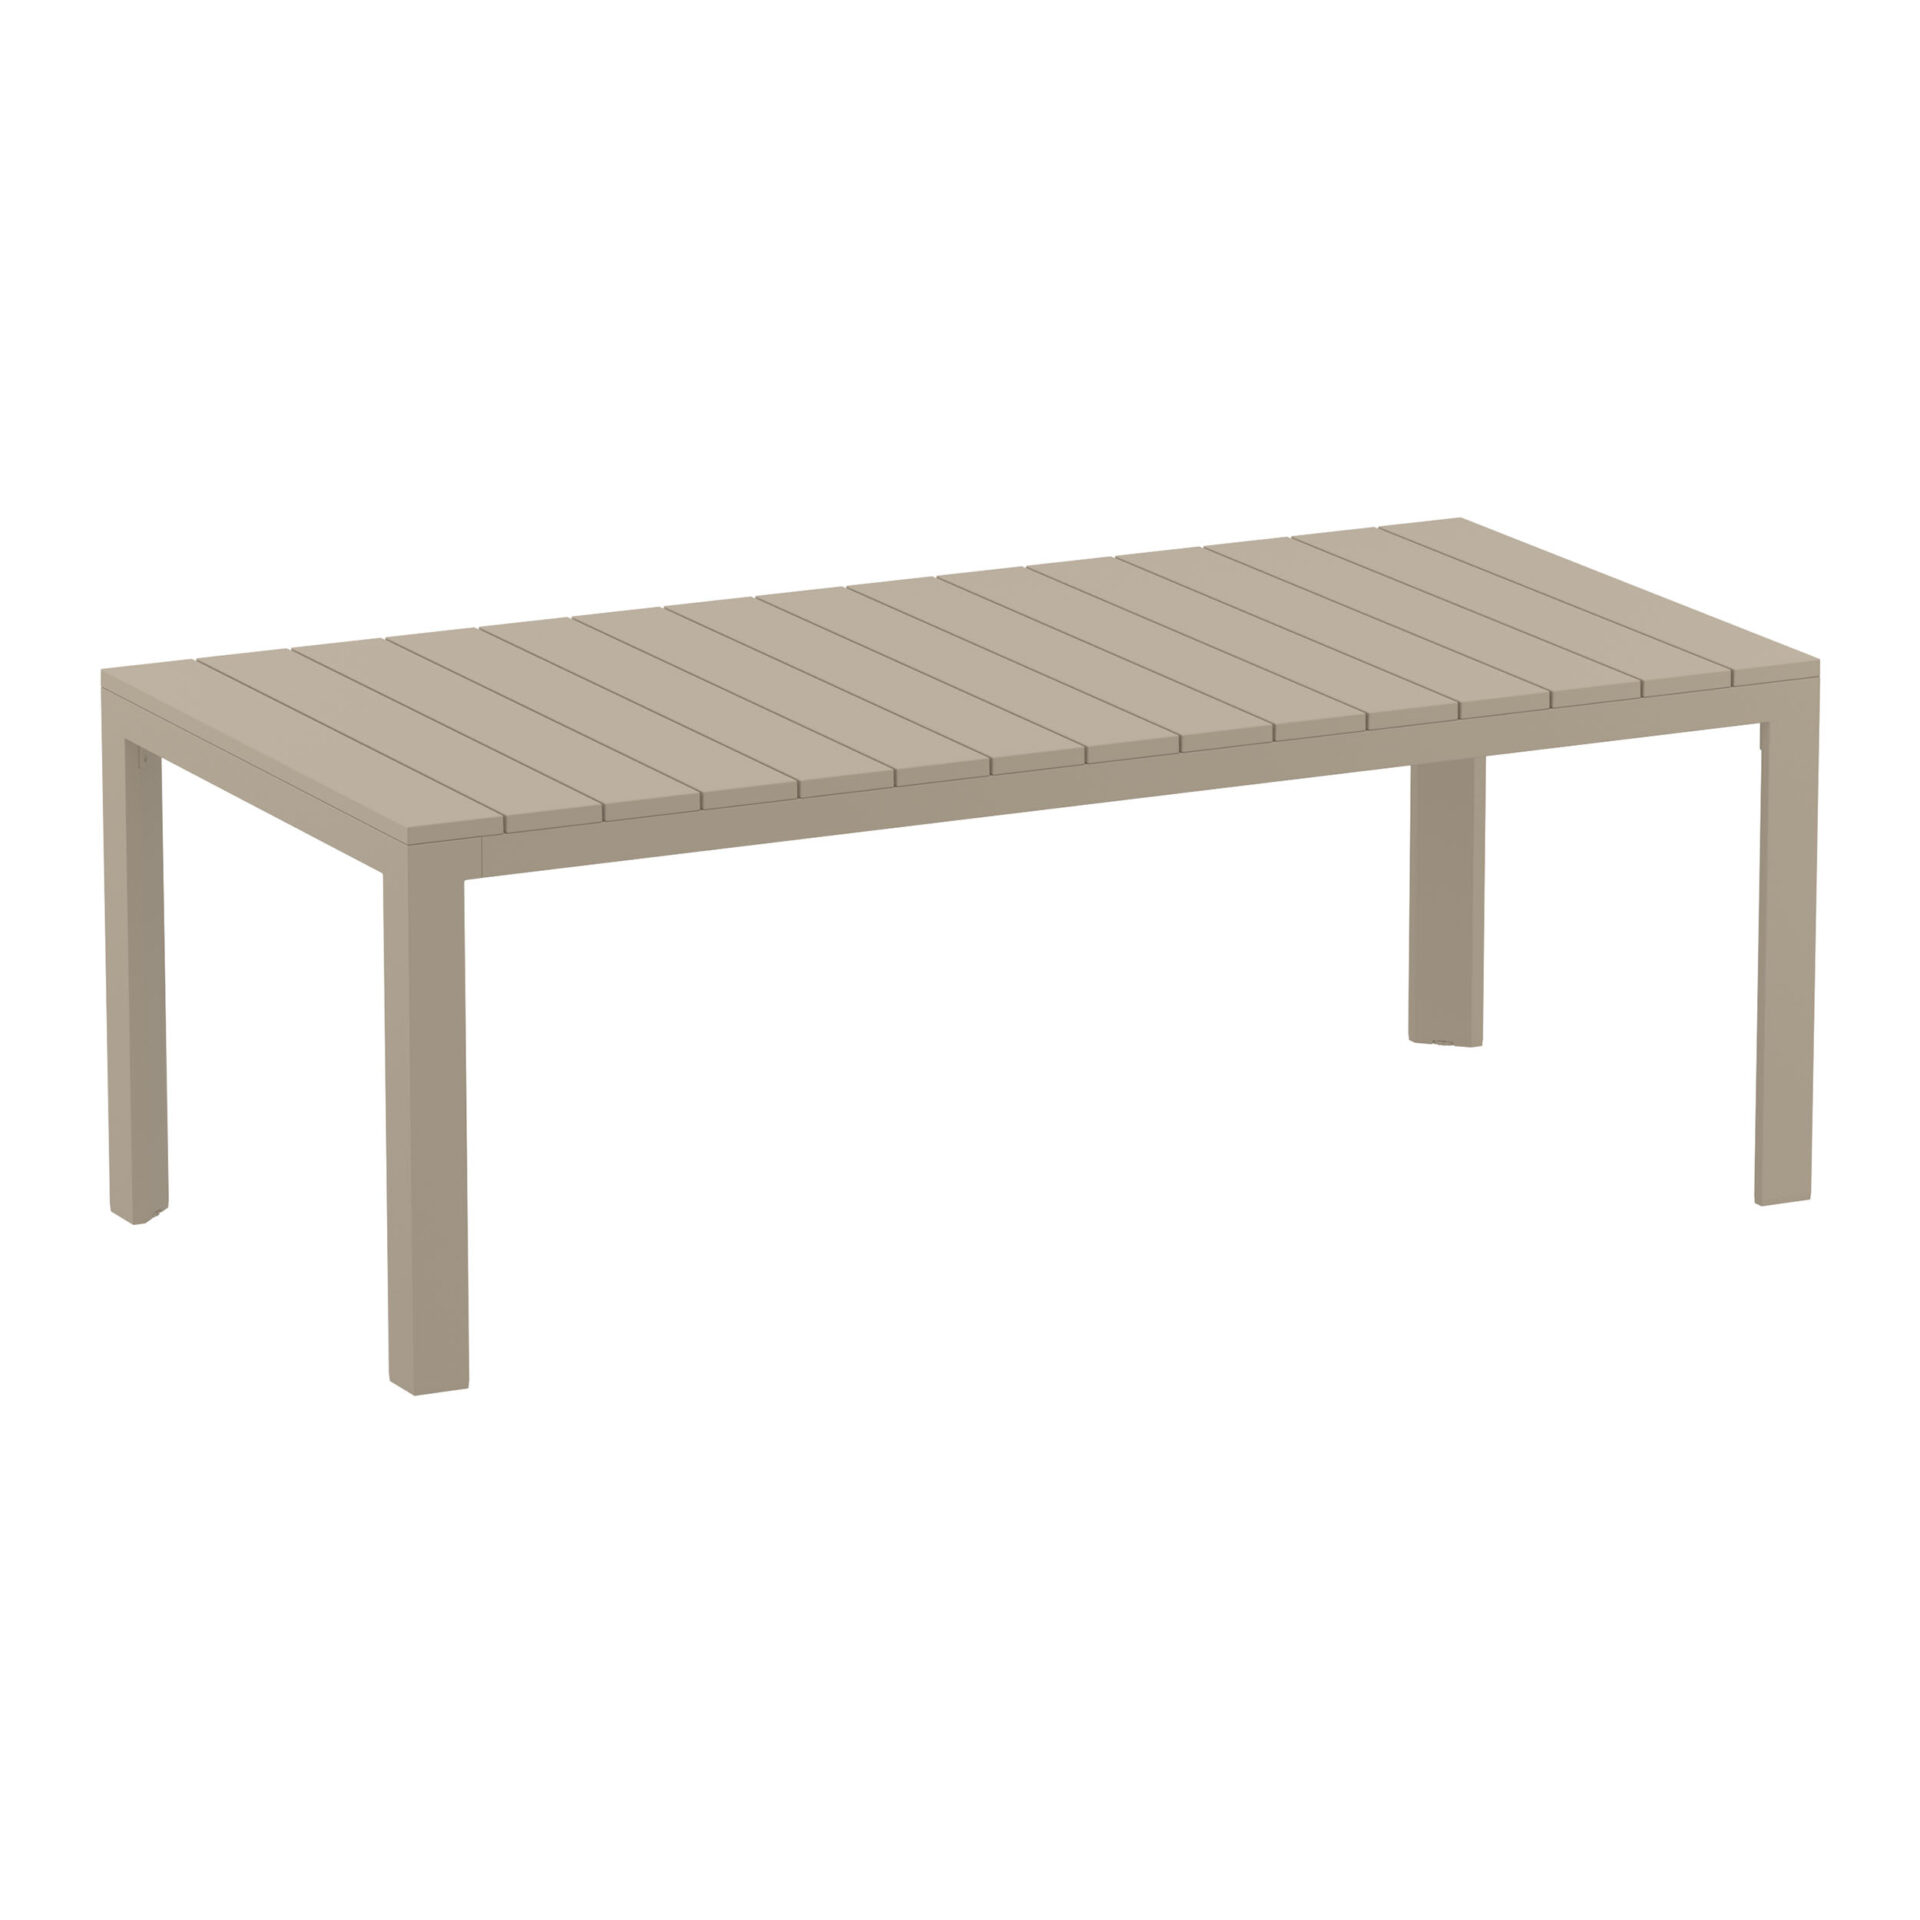 Atlantic Outdoor Extendable Table 2100-2800mm colour TAUPE available to order now!